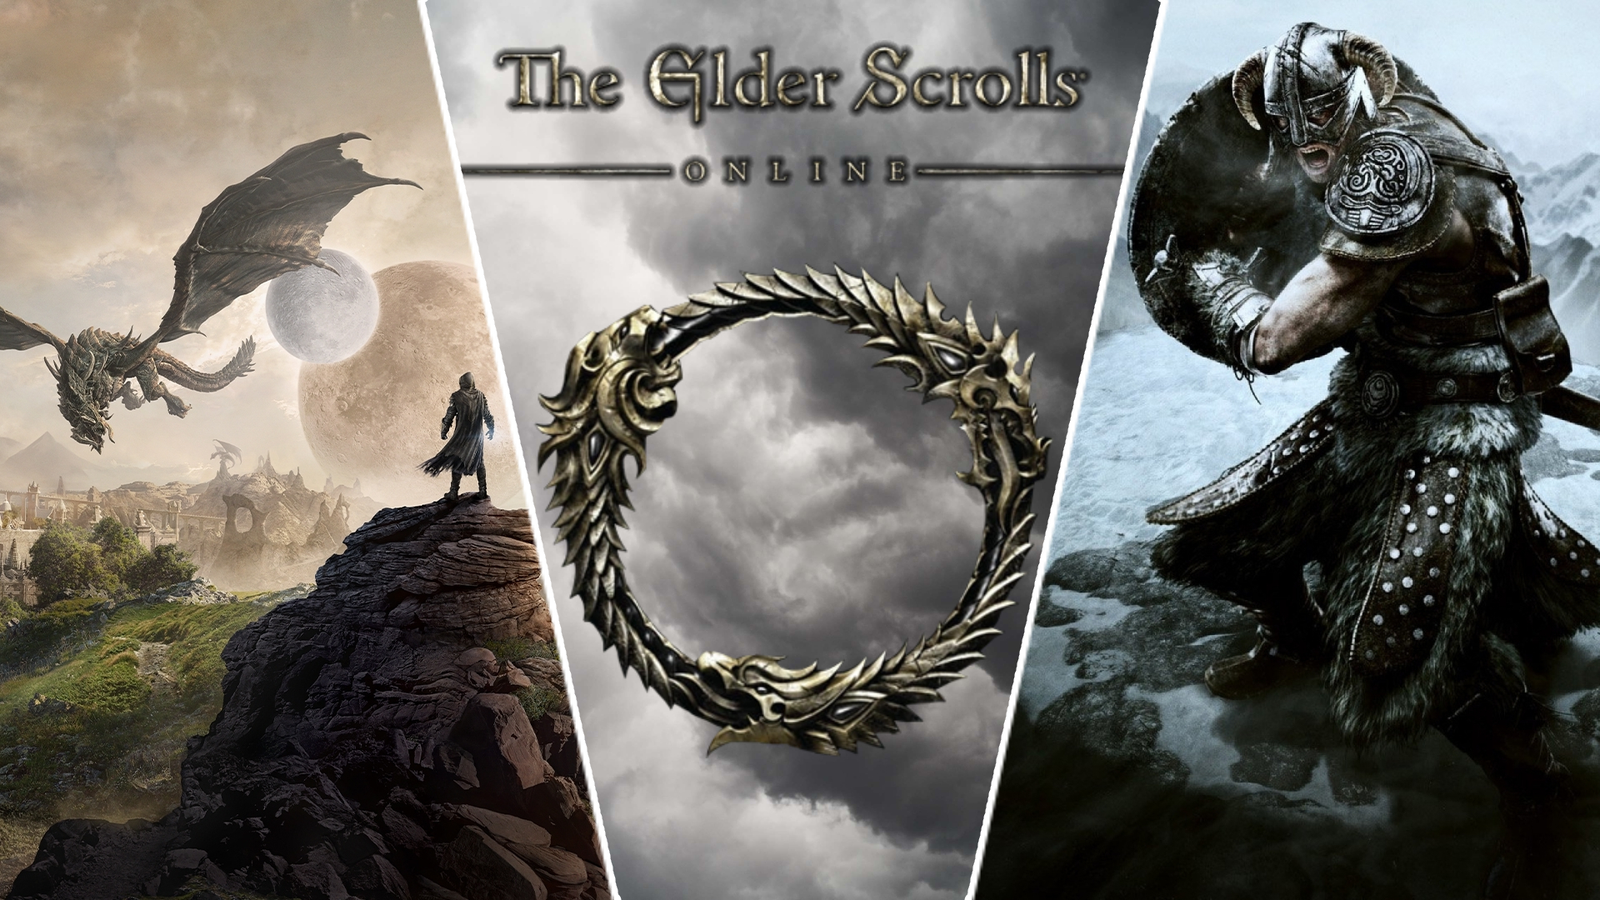 I downloaded 'The Elder Scrolls 6' but I'm starting to think it might not  really be The Elder Scrolls 6